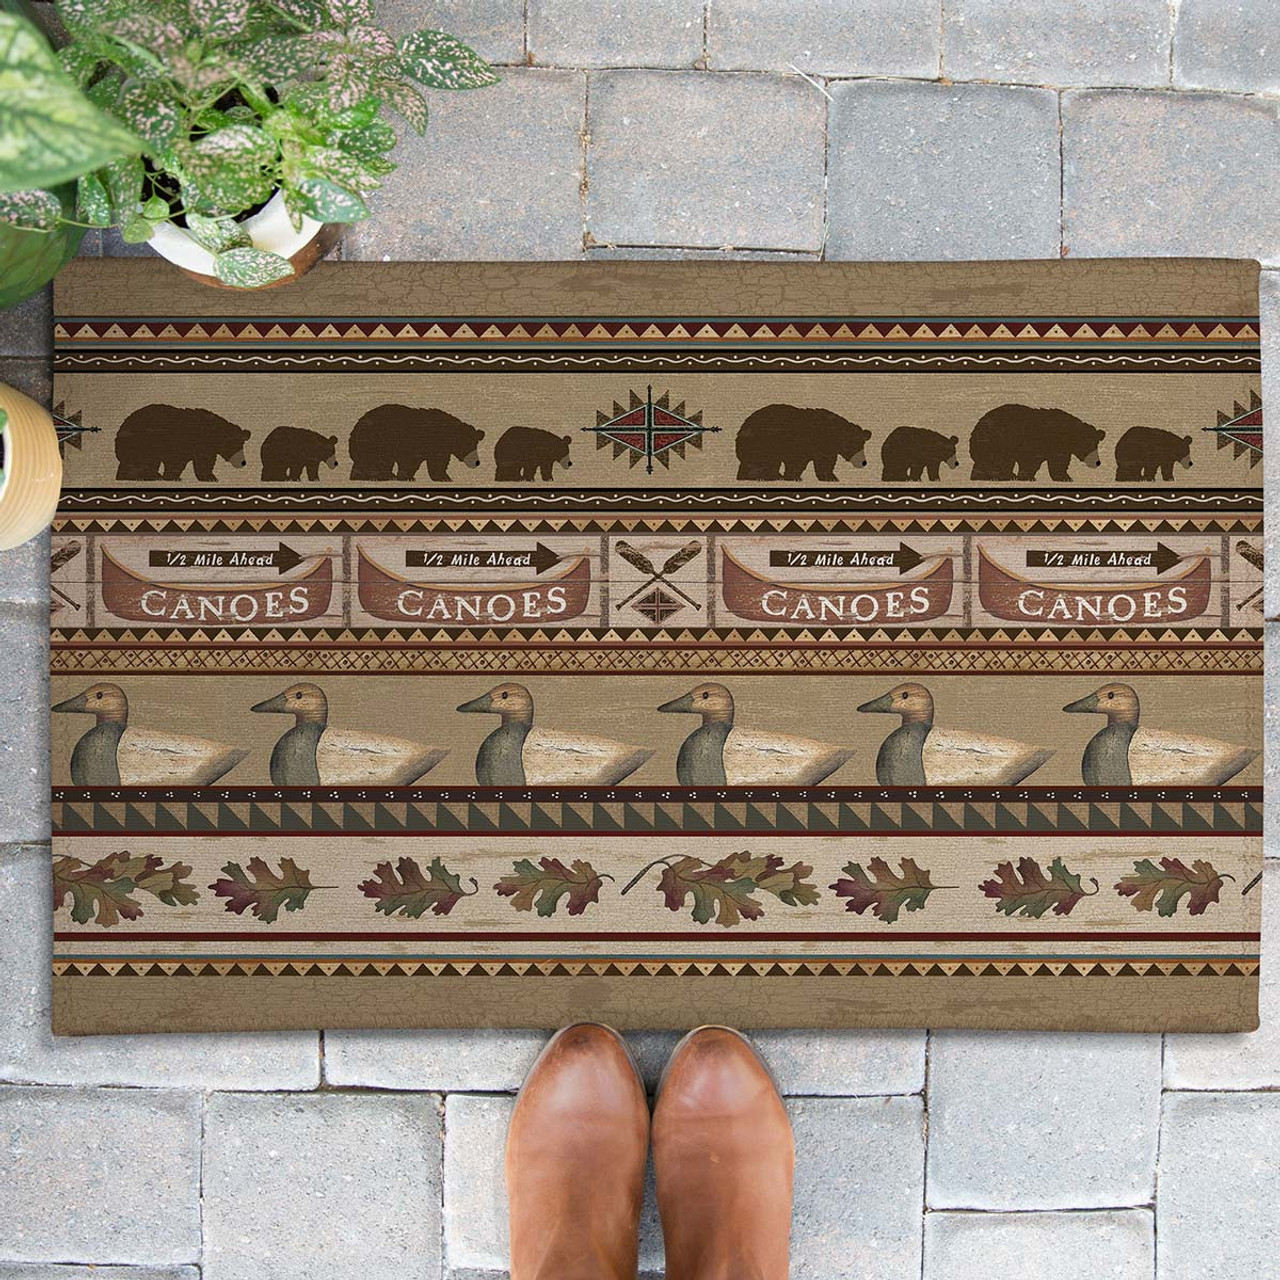 Lakeside Wilderness Outdoor Rug - 2 x 3